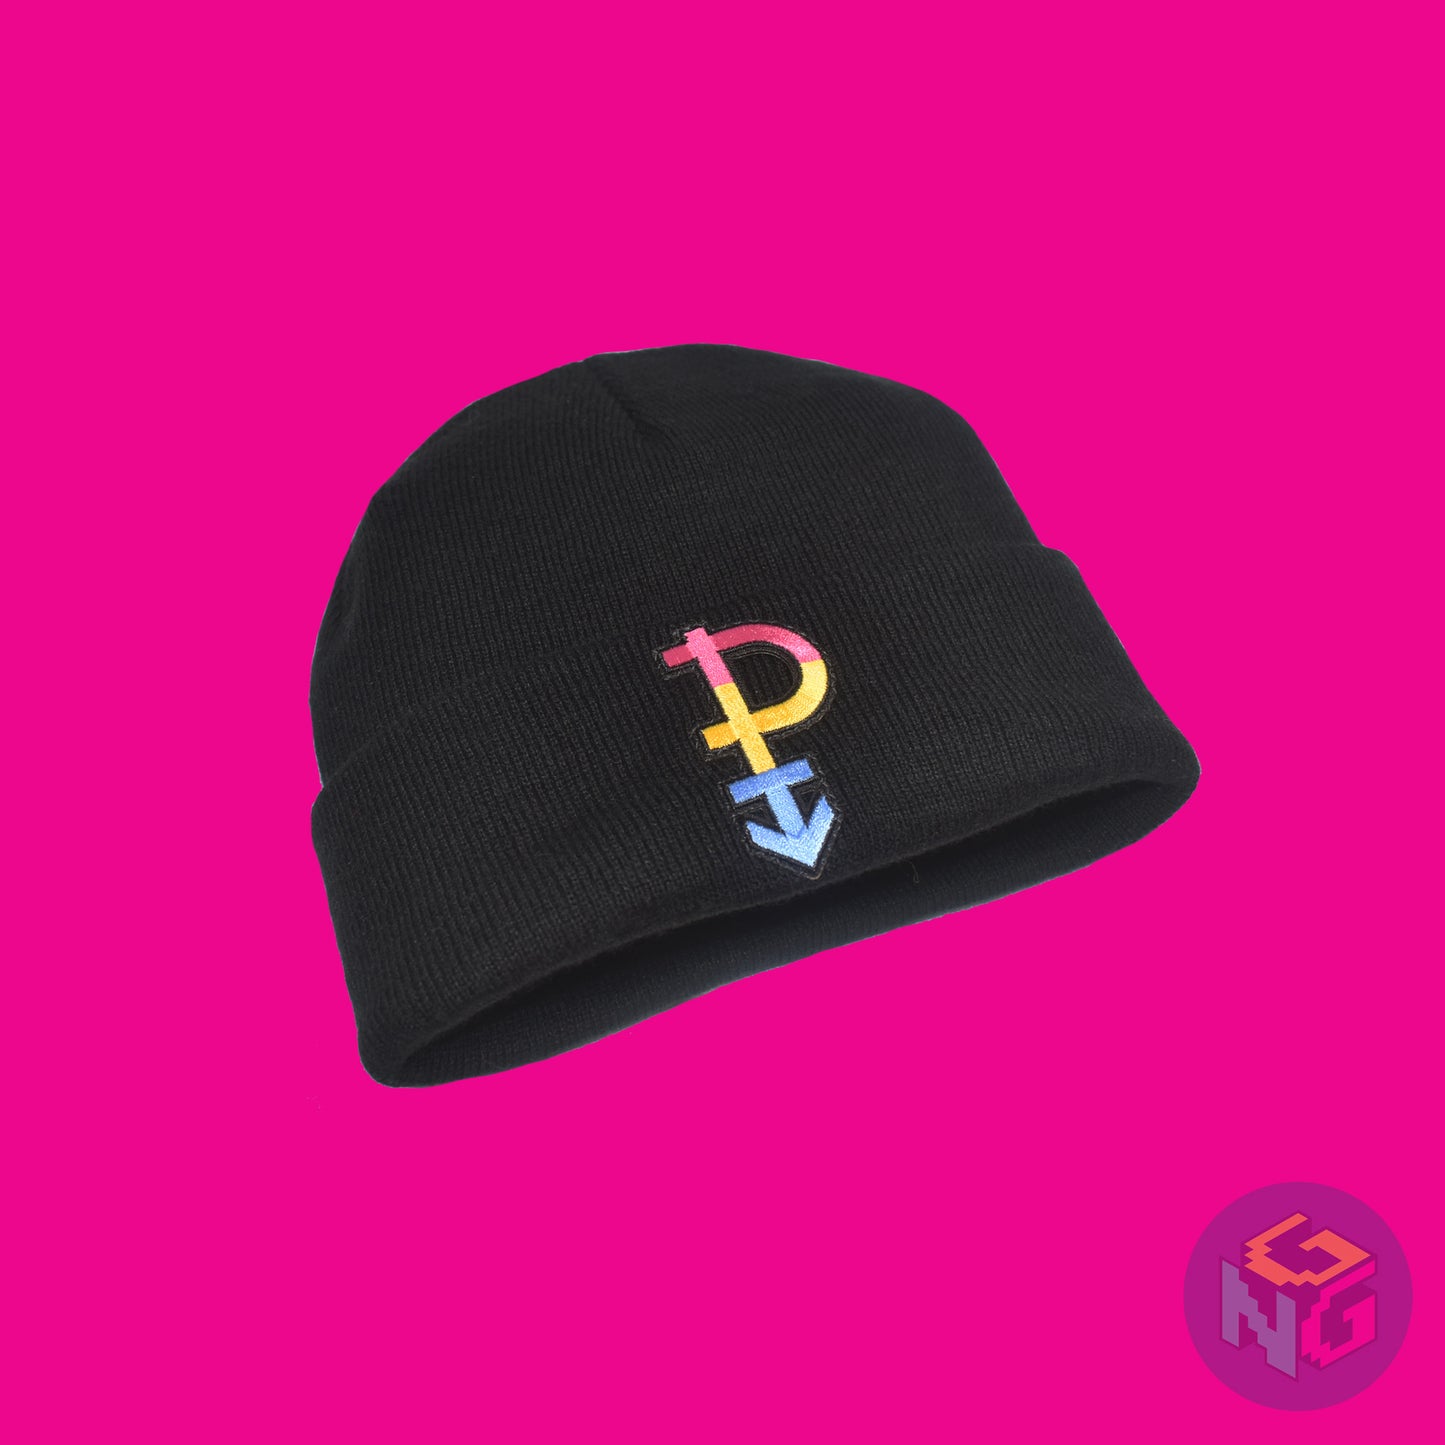 Black knit fabric beanie with the pansexual symbol in pink, yellow, and blue on the front. It is laying flat, seen from the lower left on a pink background